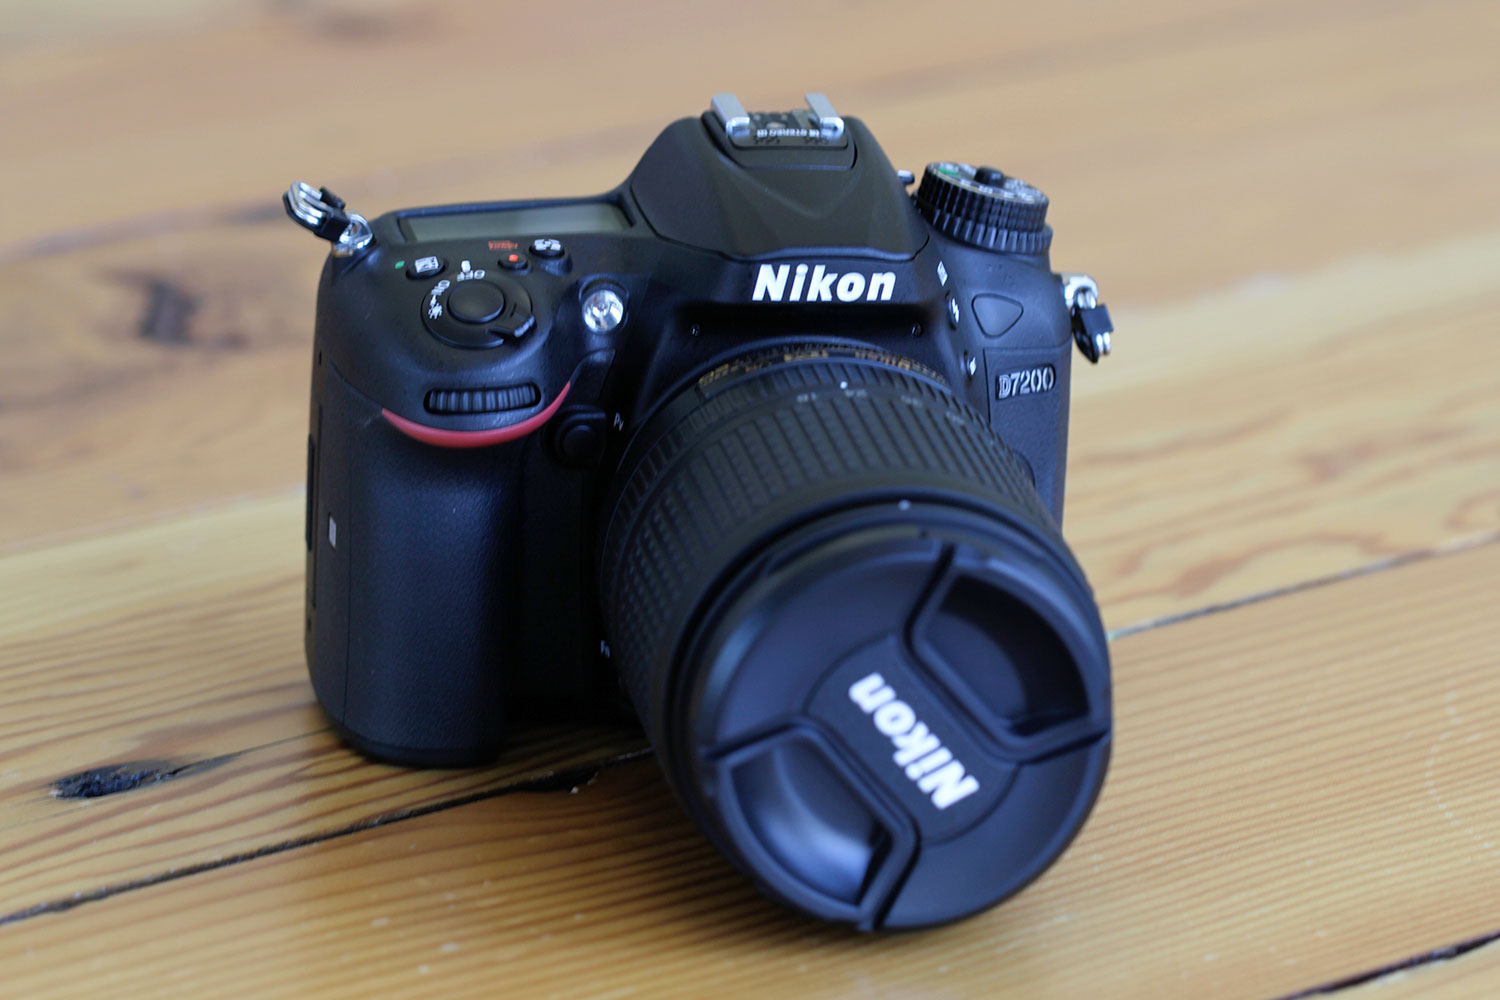 Nikon D7200 Review: An Updated Favorite At An Affordable Price